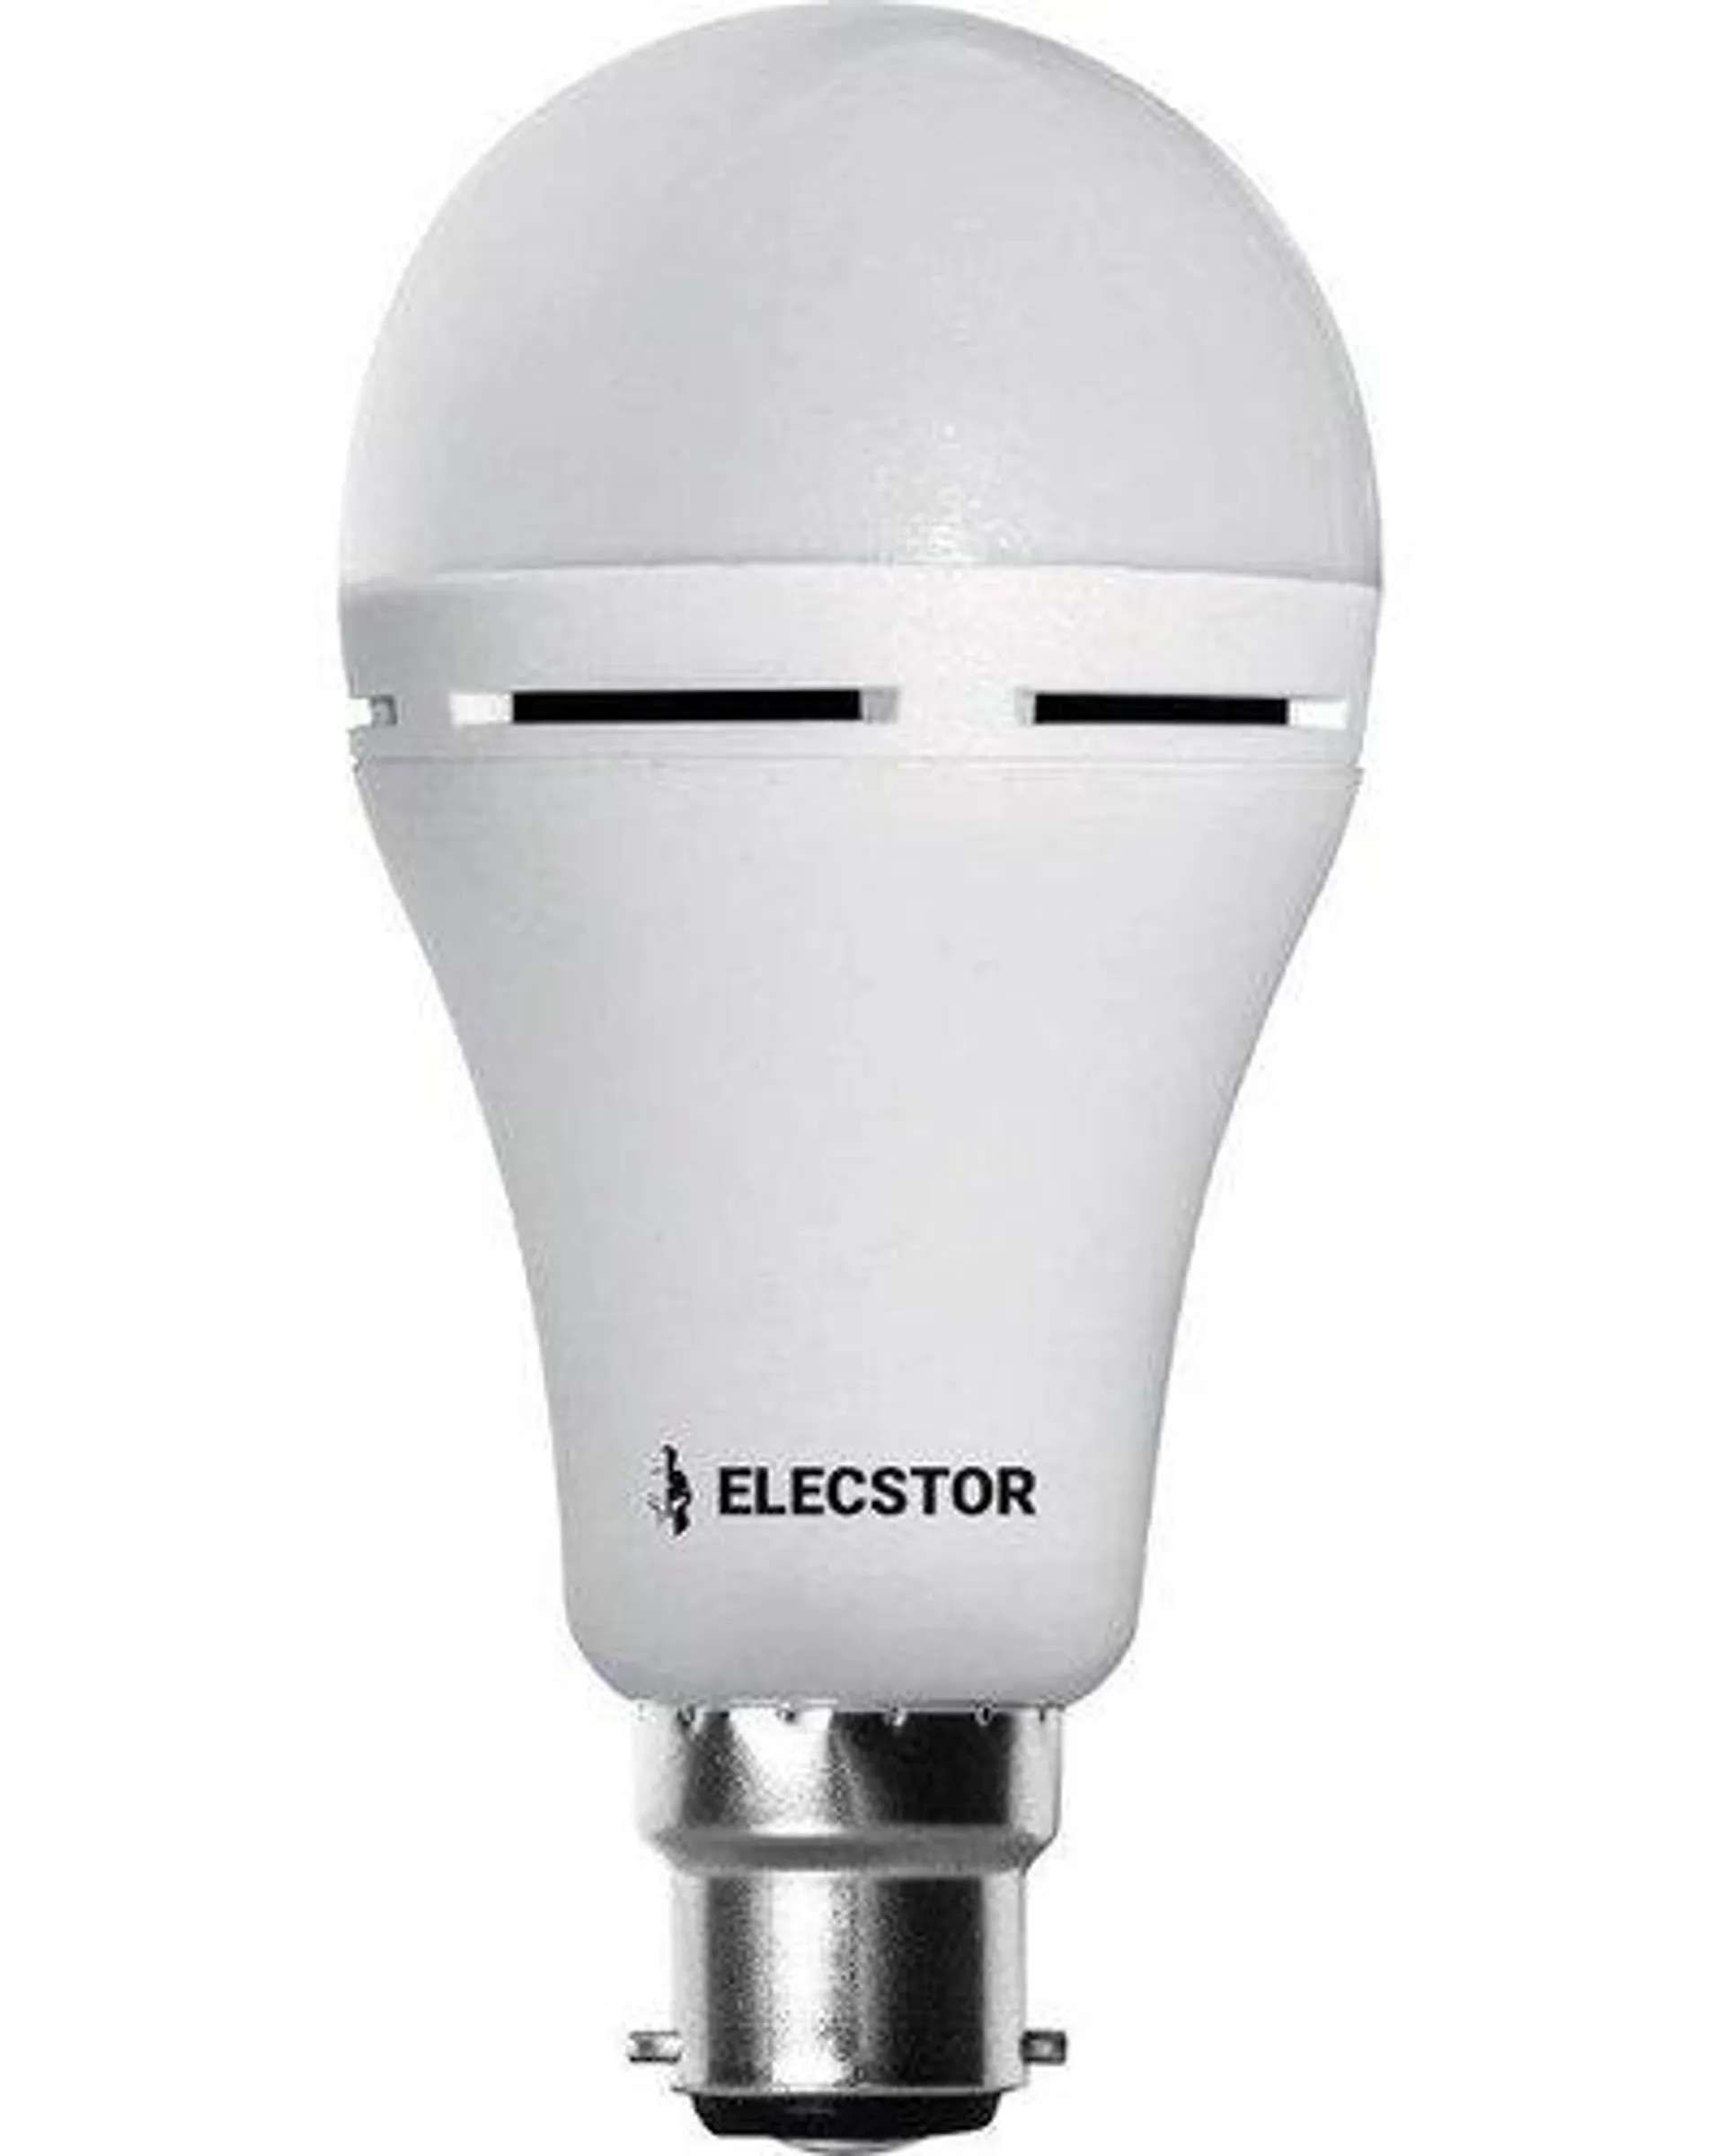 Elecstor B22 7W Rechargeable LED Bulb (Cool White)